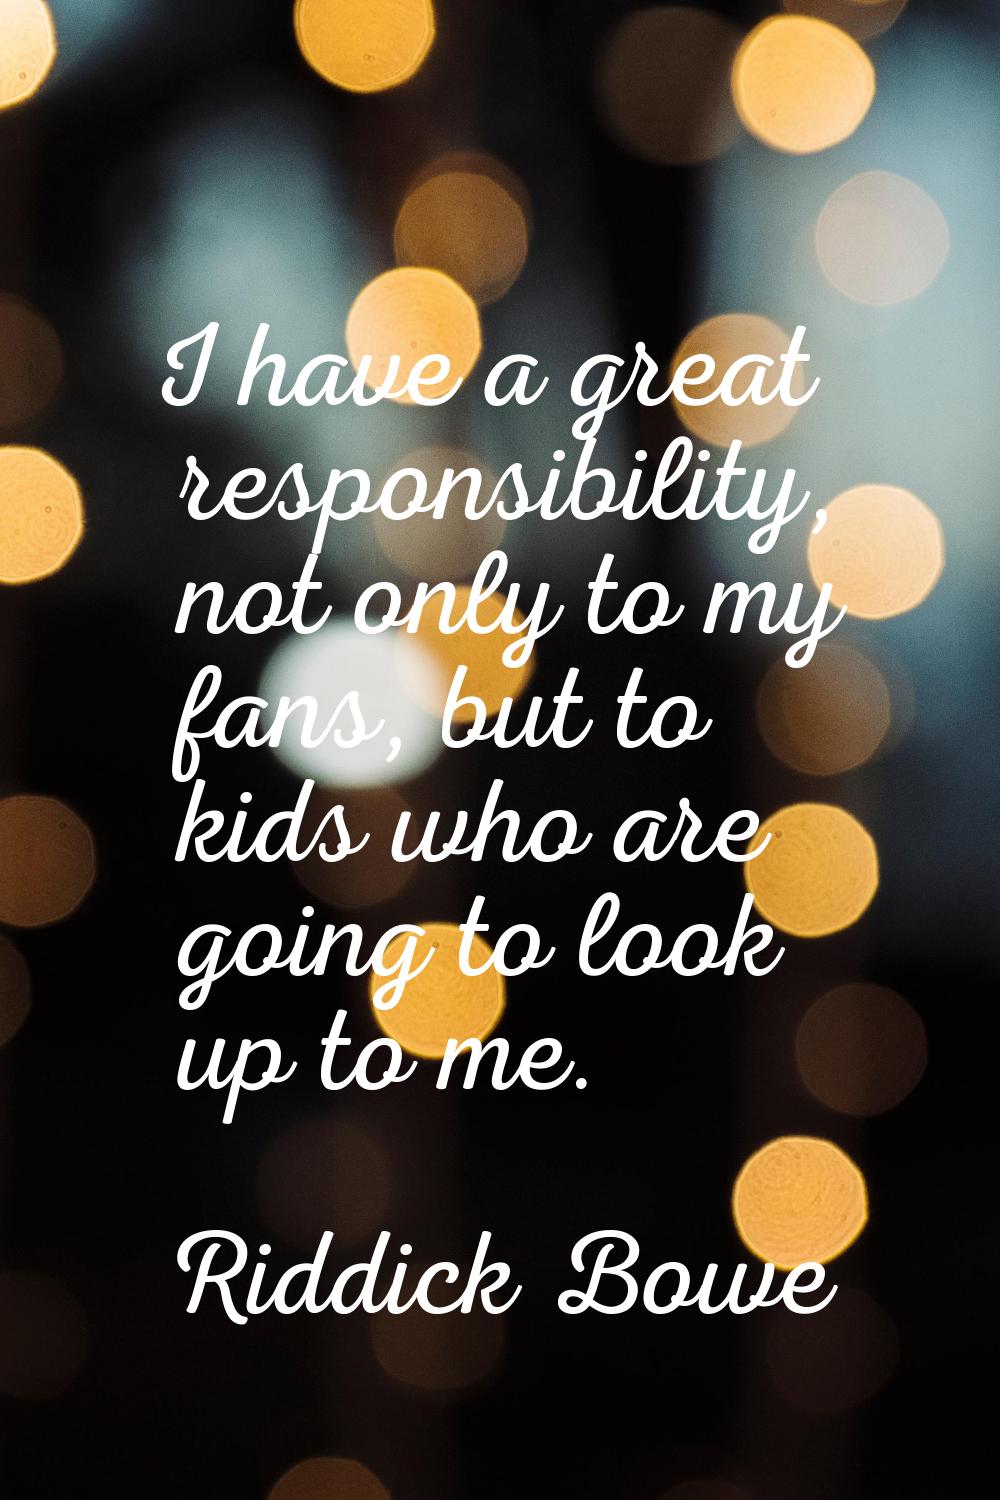 I have a great responsibility, not only to my fans, but to kids who are going to look up to me.